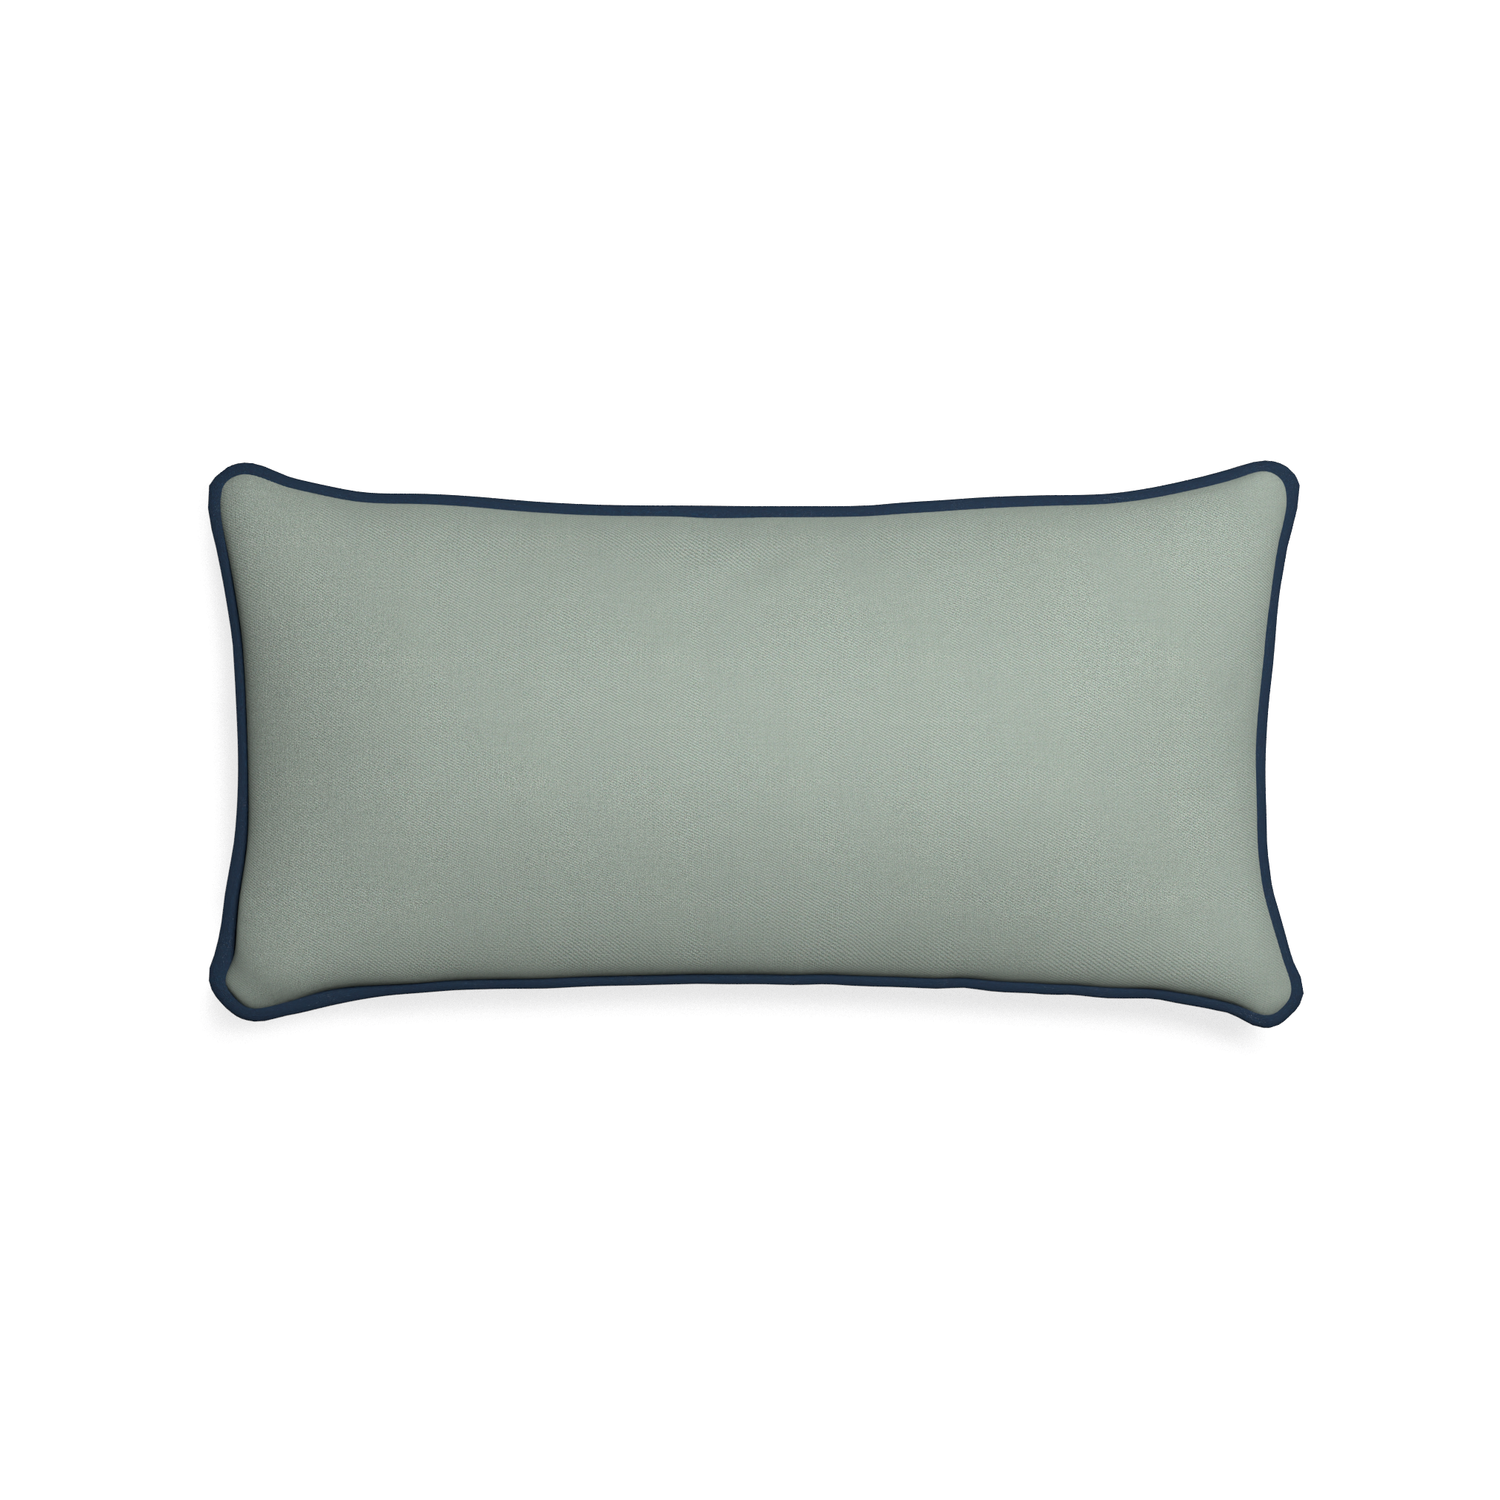 Midi-lumbar sage custom sage green cottonpillow with c piping on white background